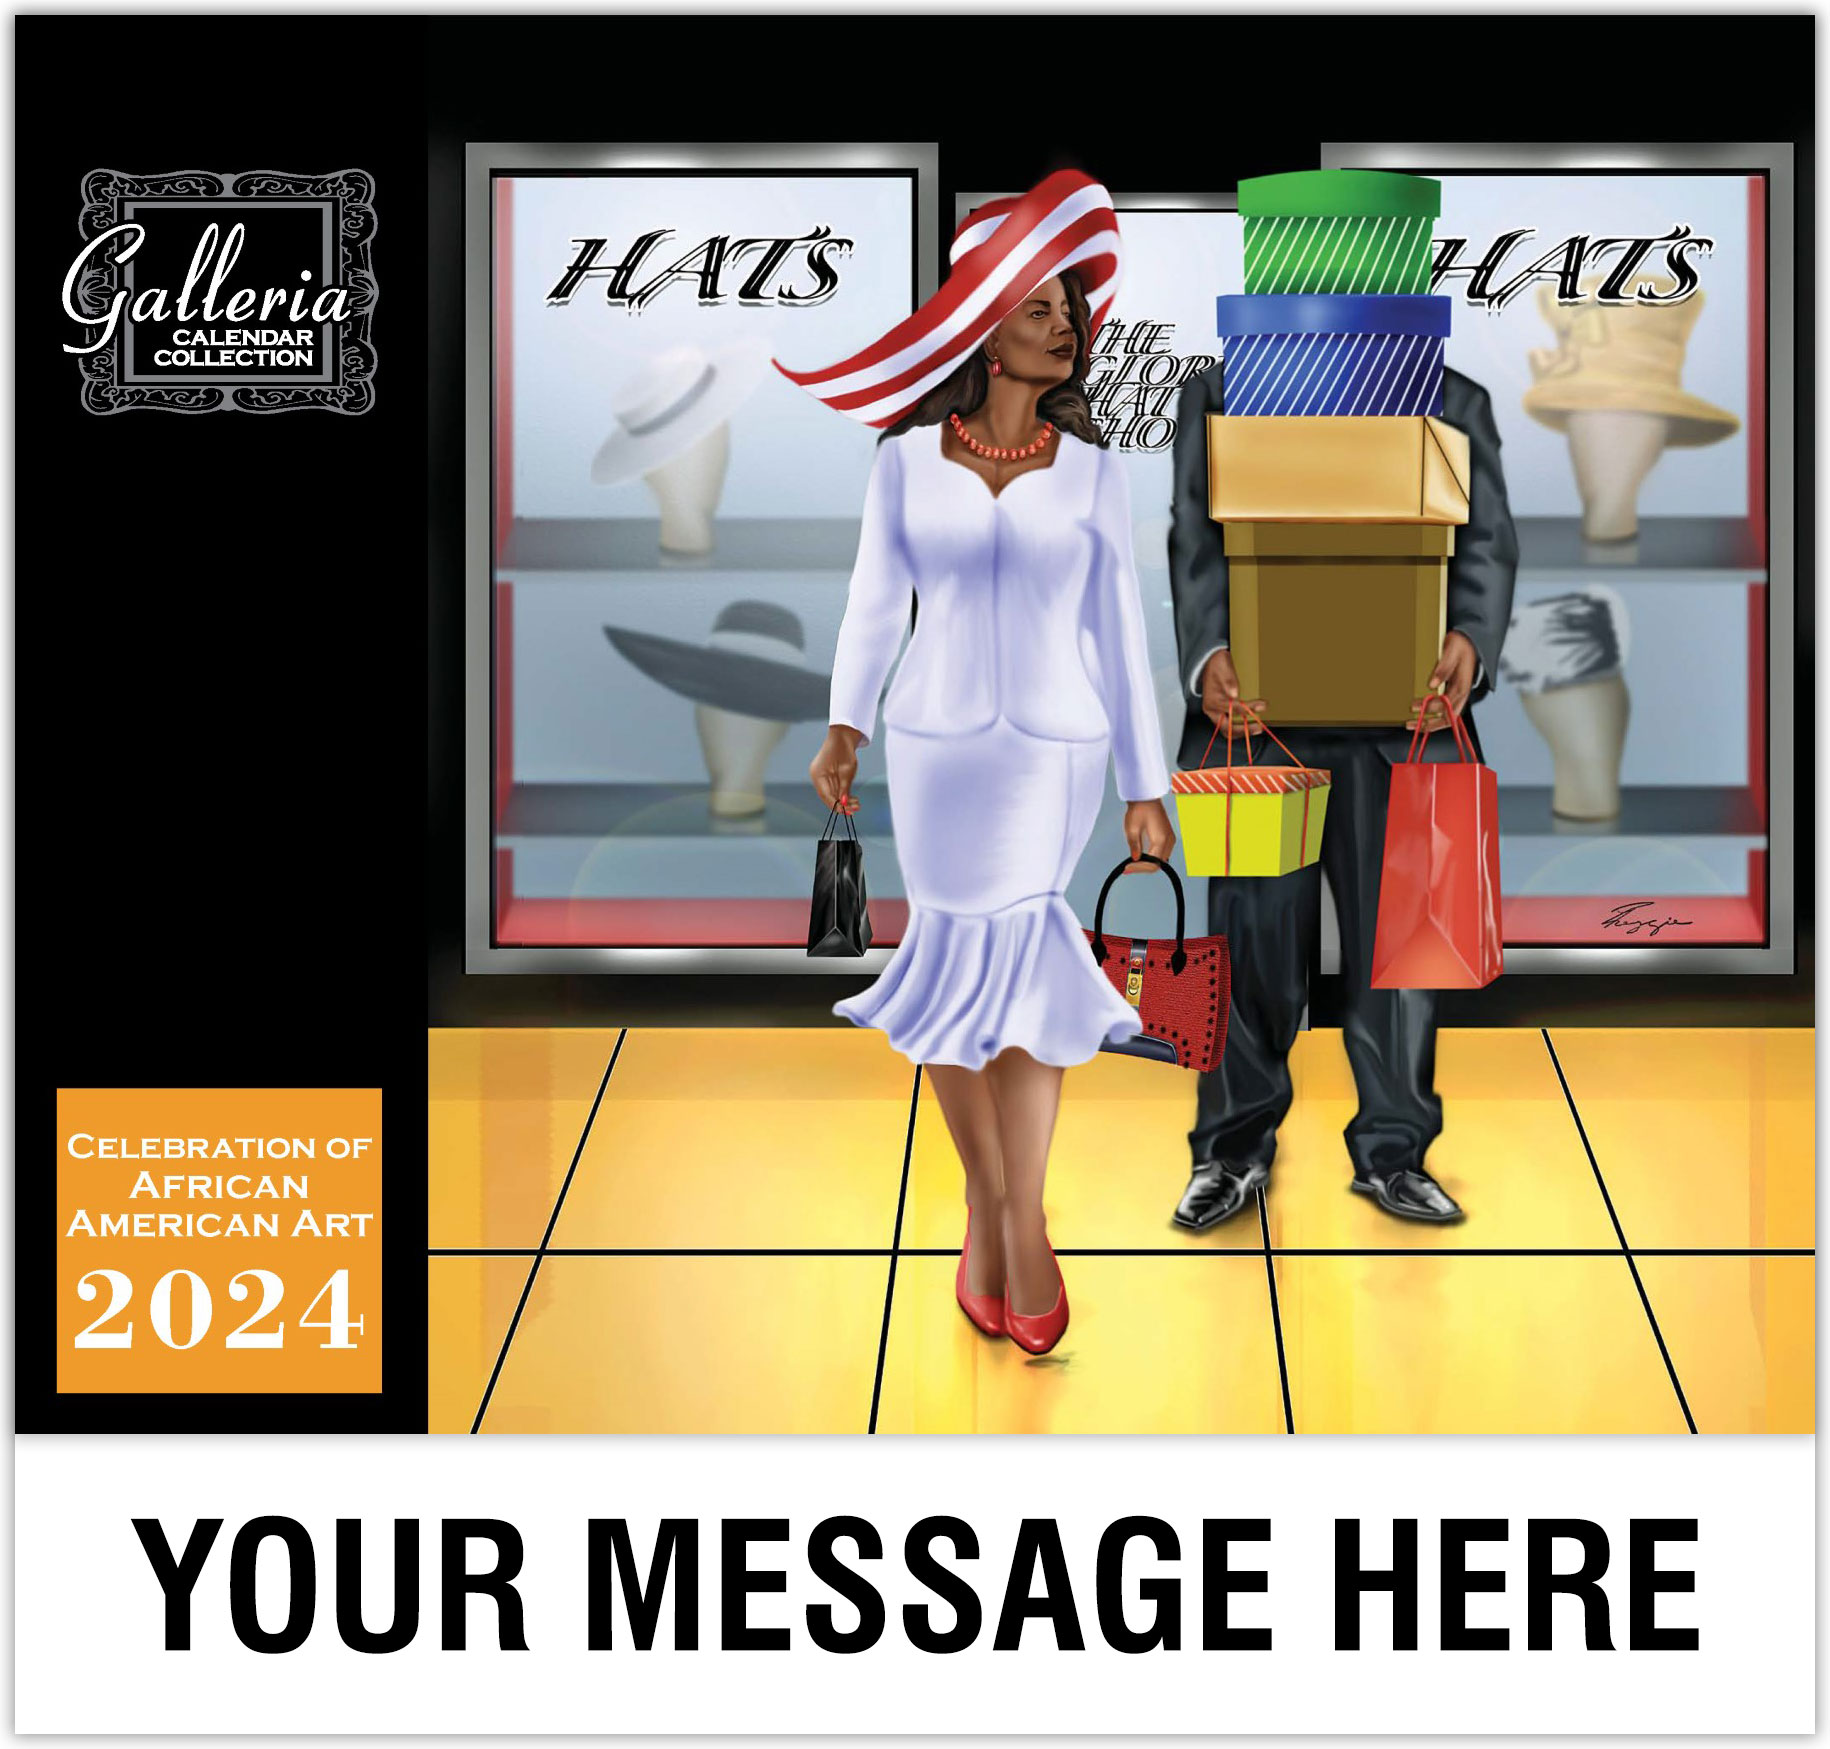 GalleriaCalendars Promo Calendars Are The Most Effective Promotional